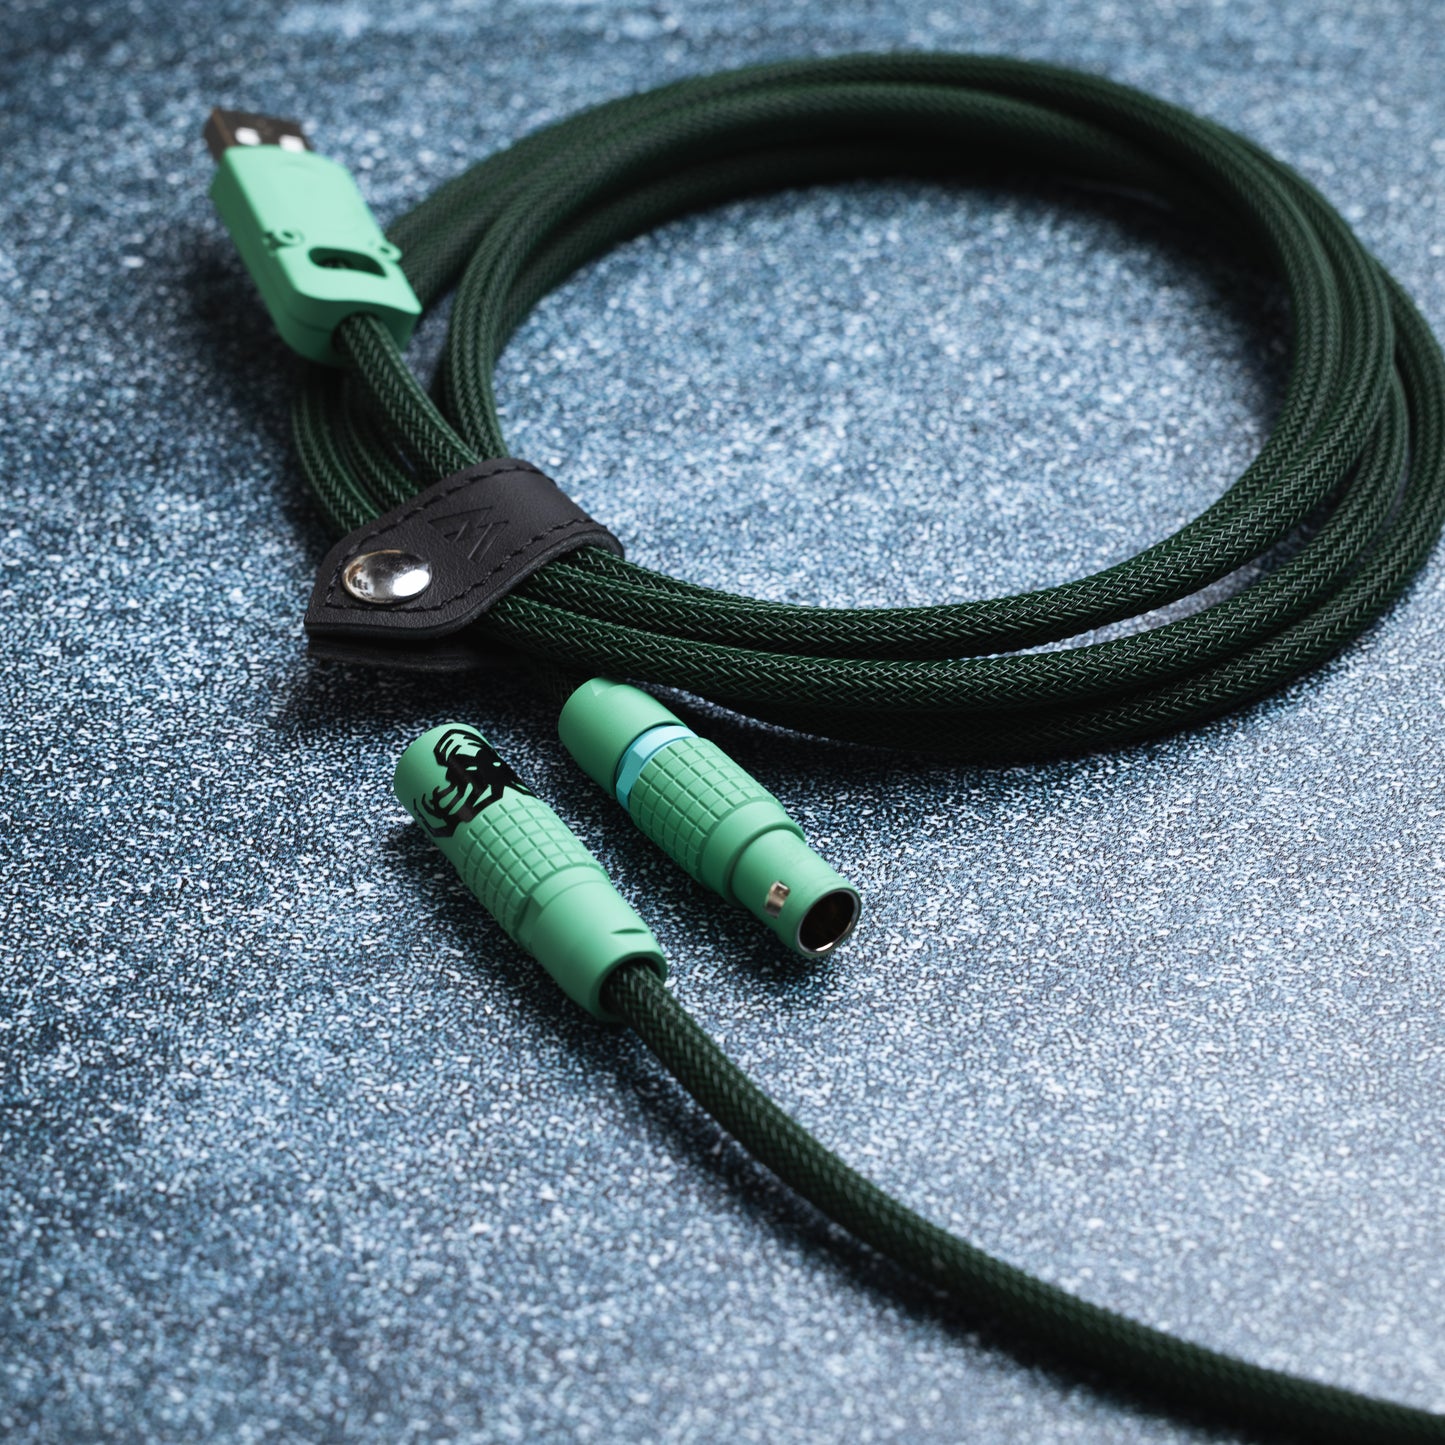 GMK Terror Below cable with Cerakote green connector and matching CNC shells, dark green sleeving with MDPC blackest black and forest green TechFlex